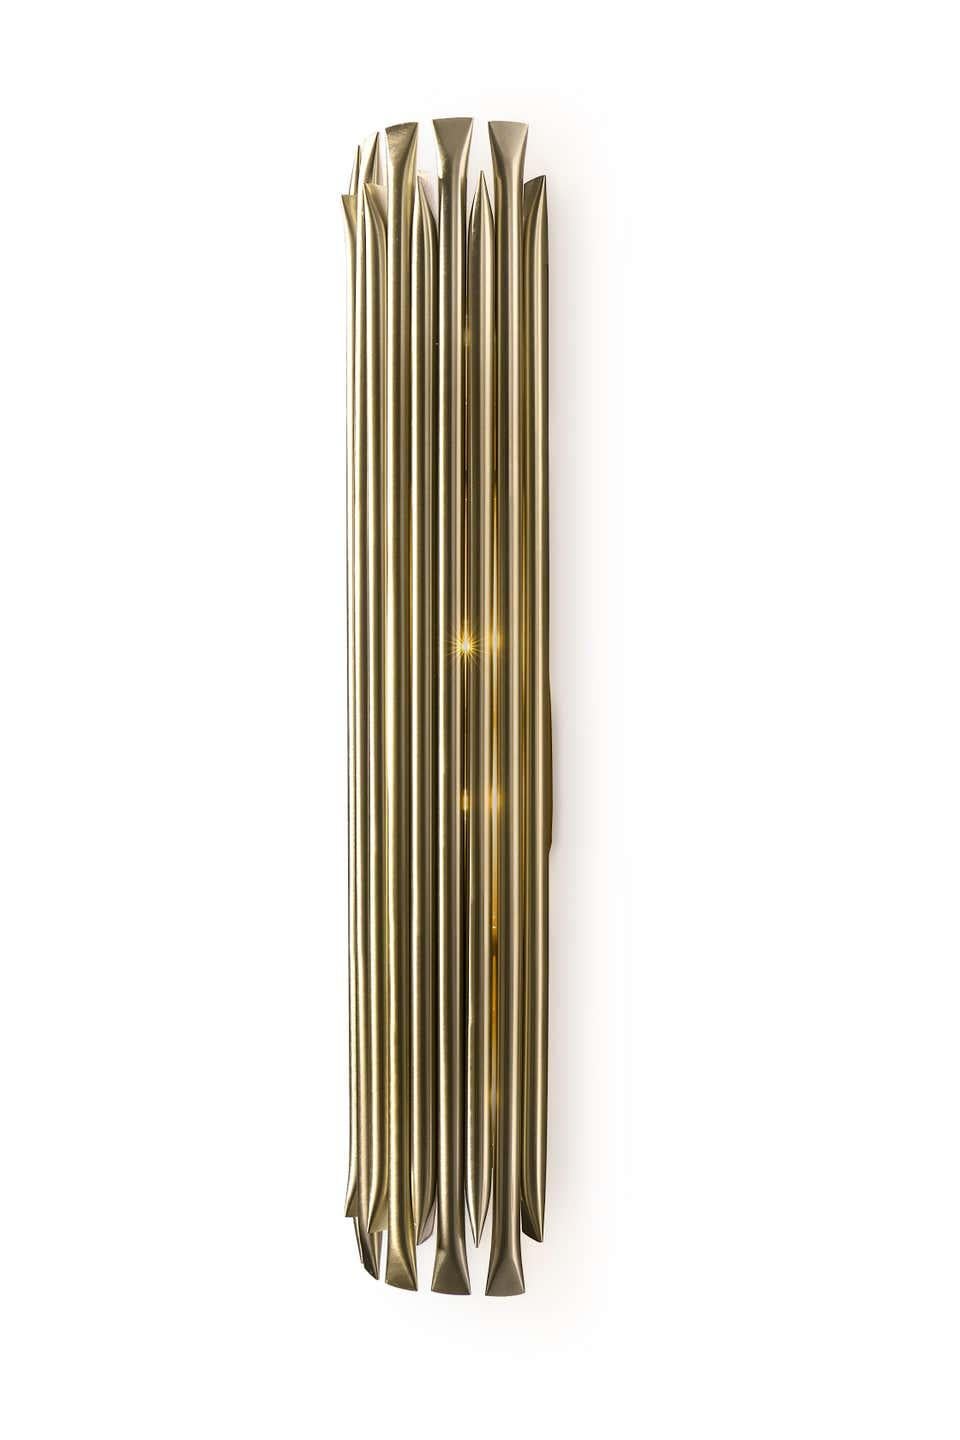 Large Wall Light in Brass with Brushed Nickel Finish In New Condition For Sale In Saint-Ouen, FR